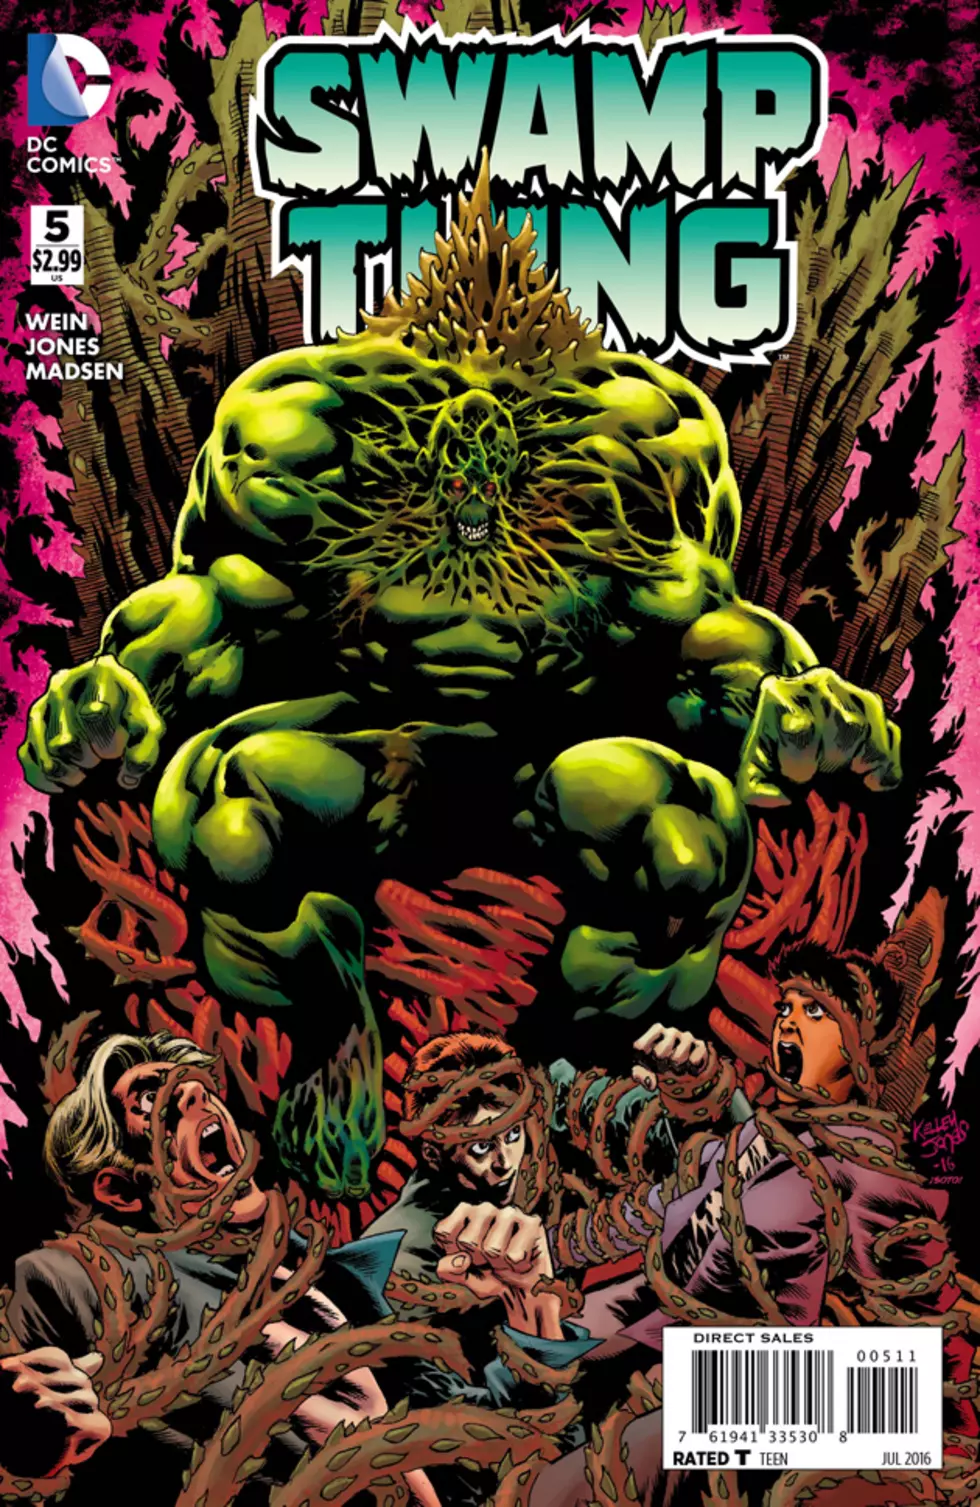 Swamp Thing Goes On A World Tour Of Arboreal Destruction In &#8216;Swamp Thing&#8217; #5